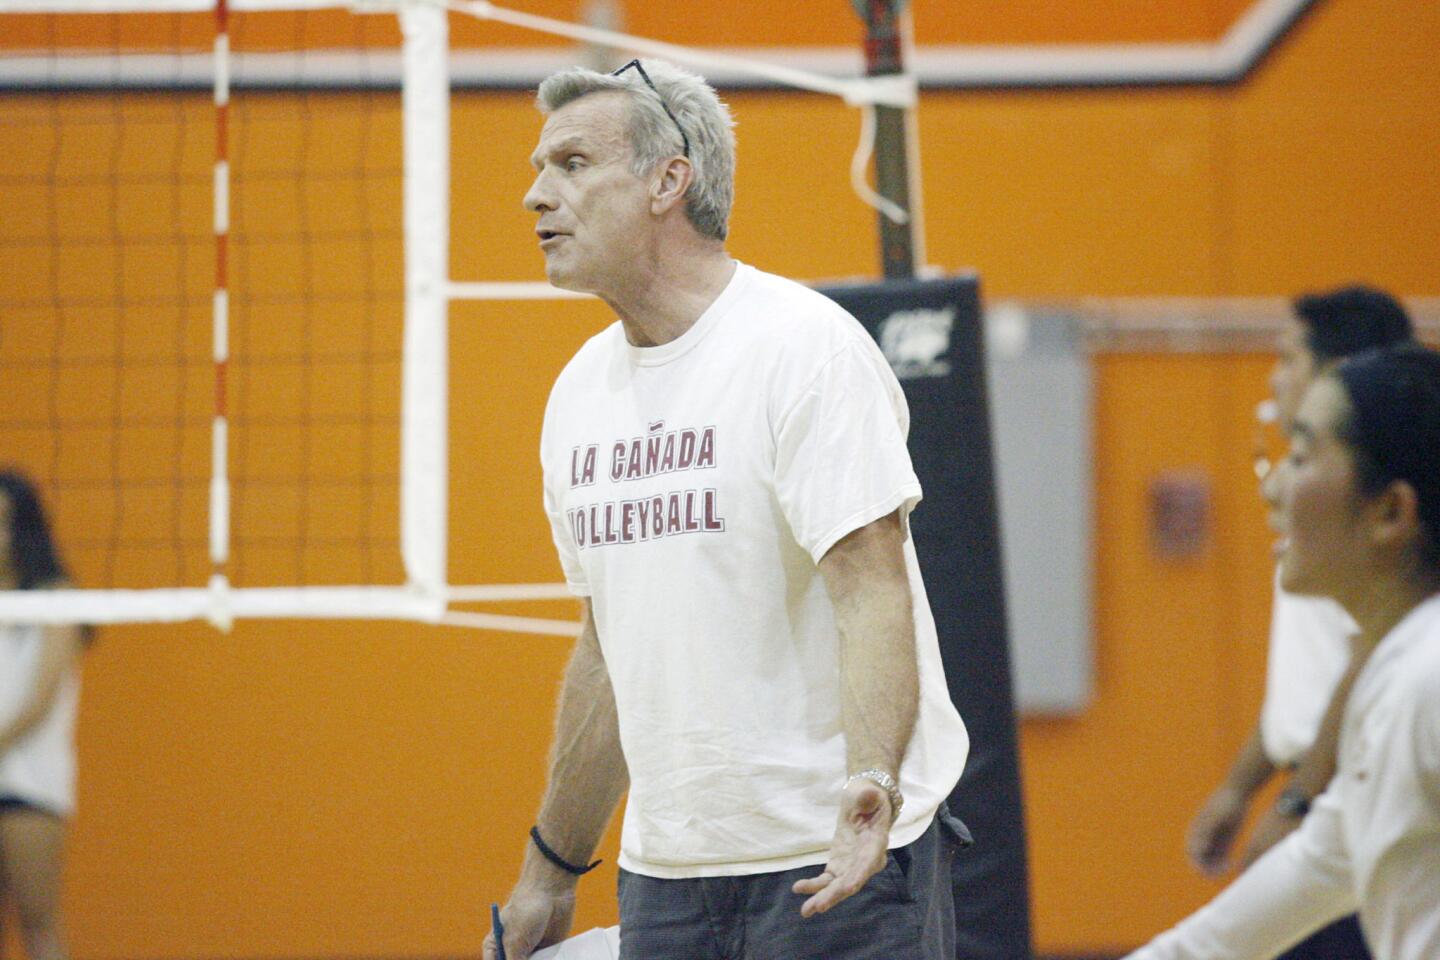 La Canada's coach Brock Turner talks to his team during a game against South Pasadena at South Pasadena High School on Thursday, September 27, 2012.